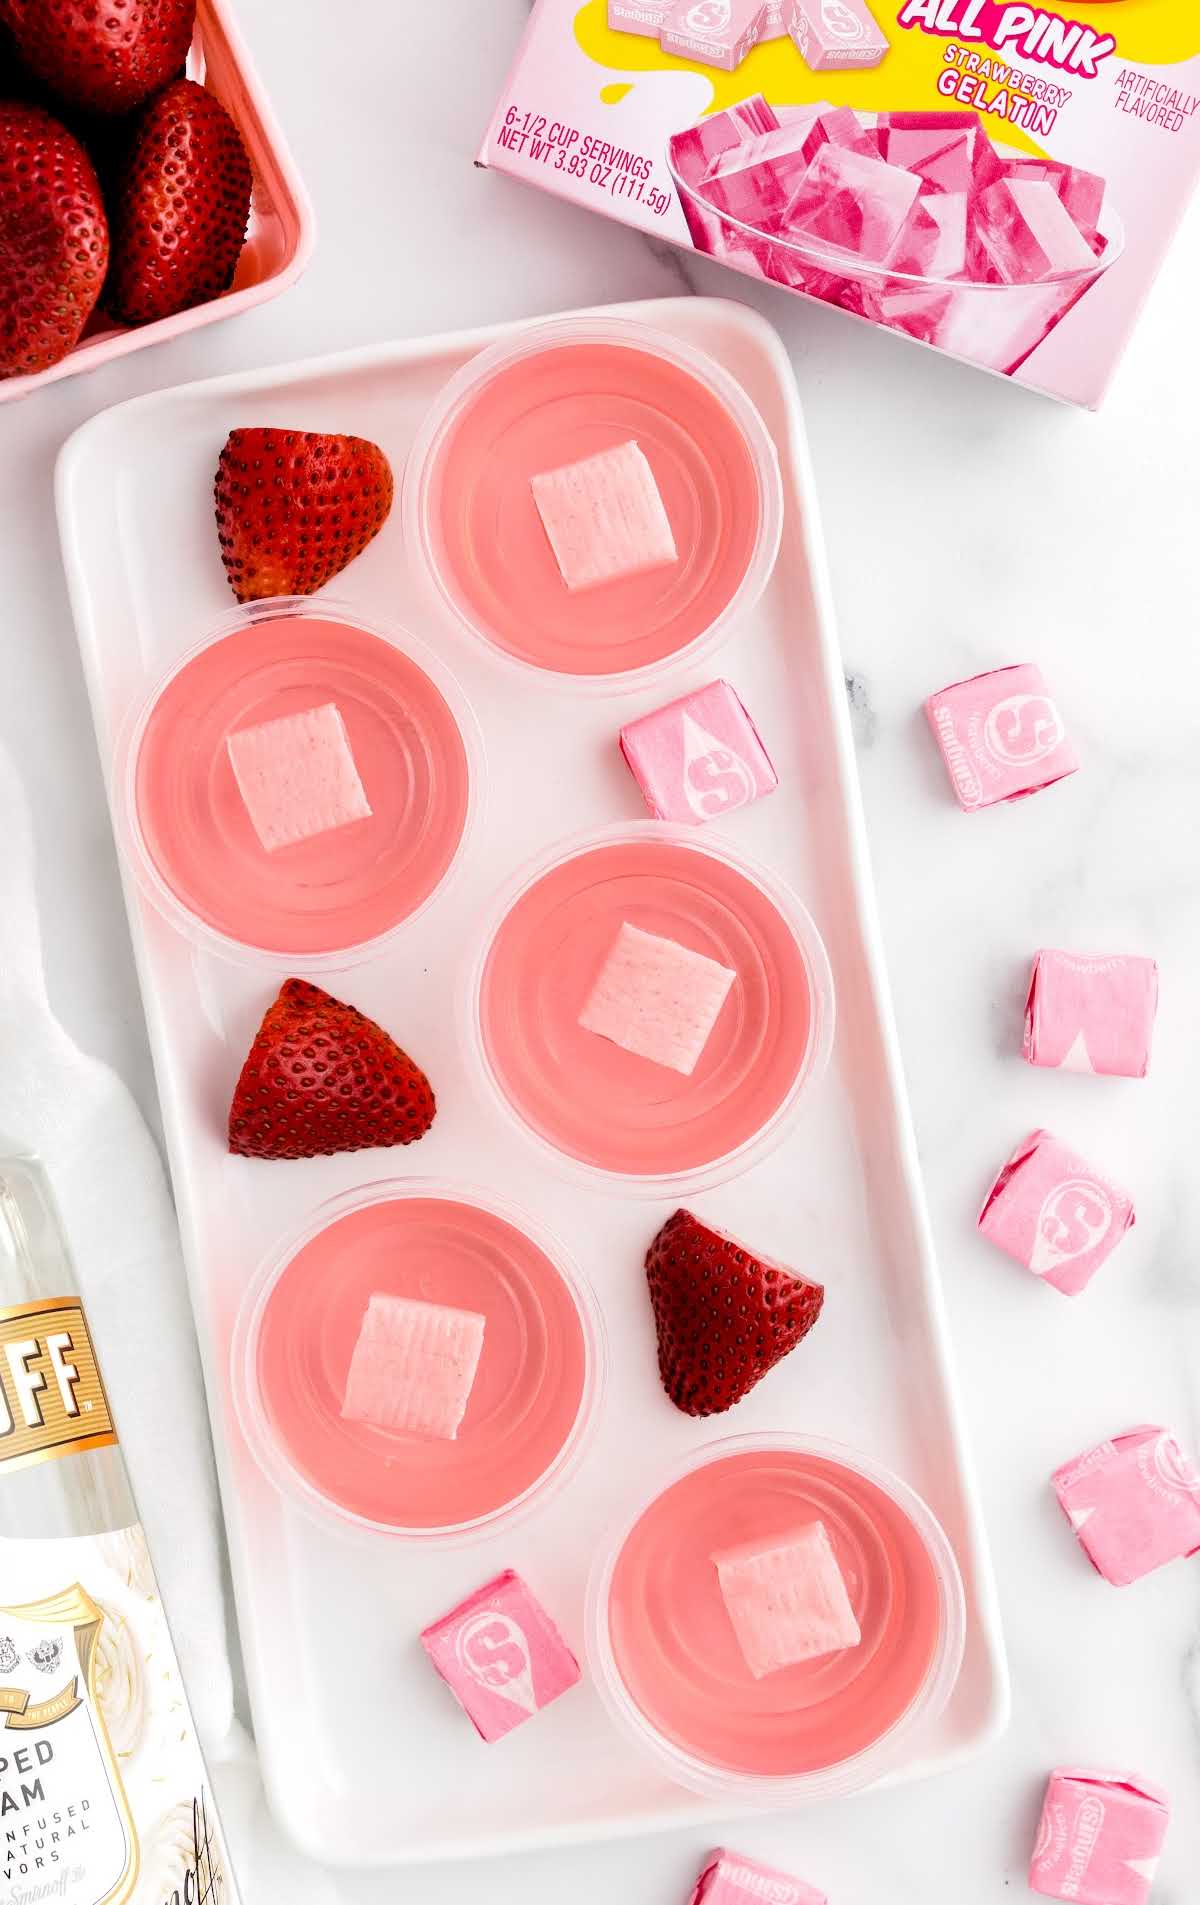 Starburst Jello Shots in a tray with strawberries on the tray